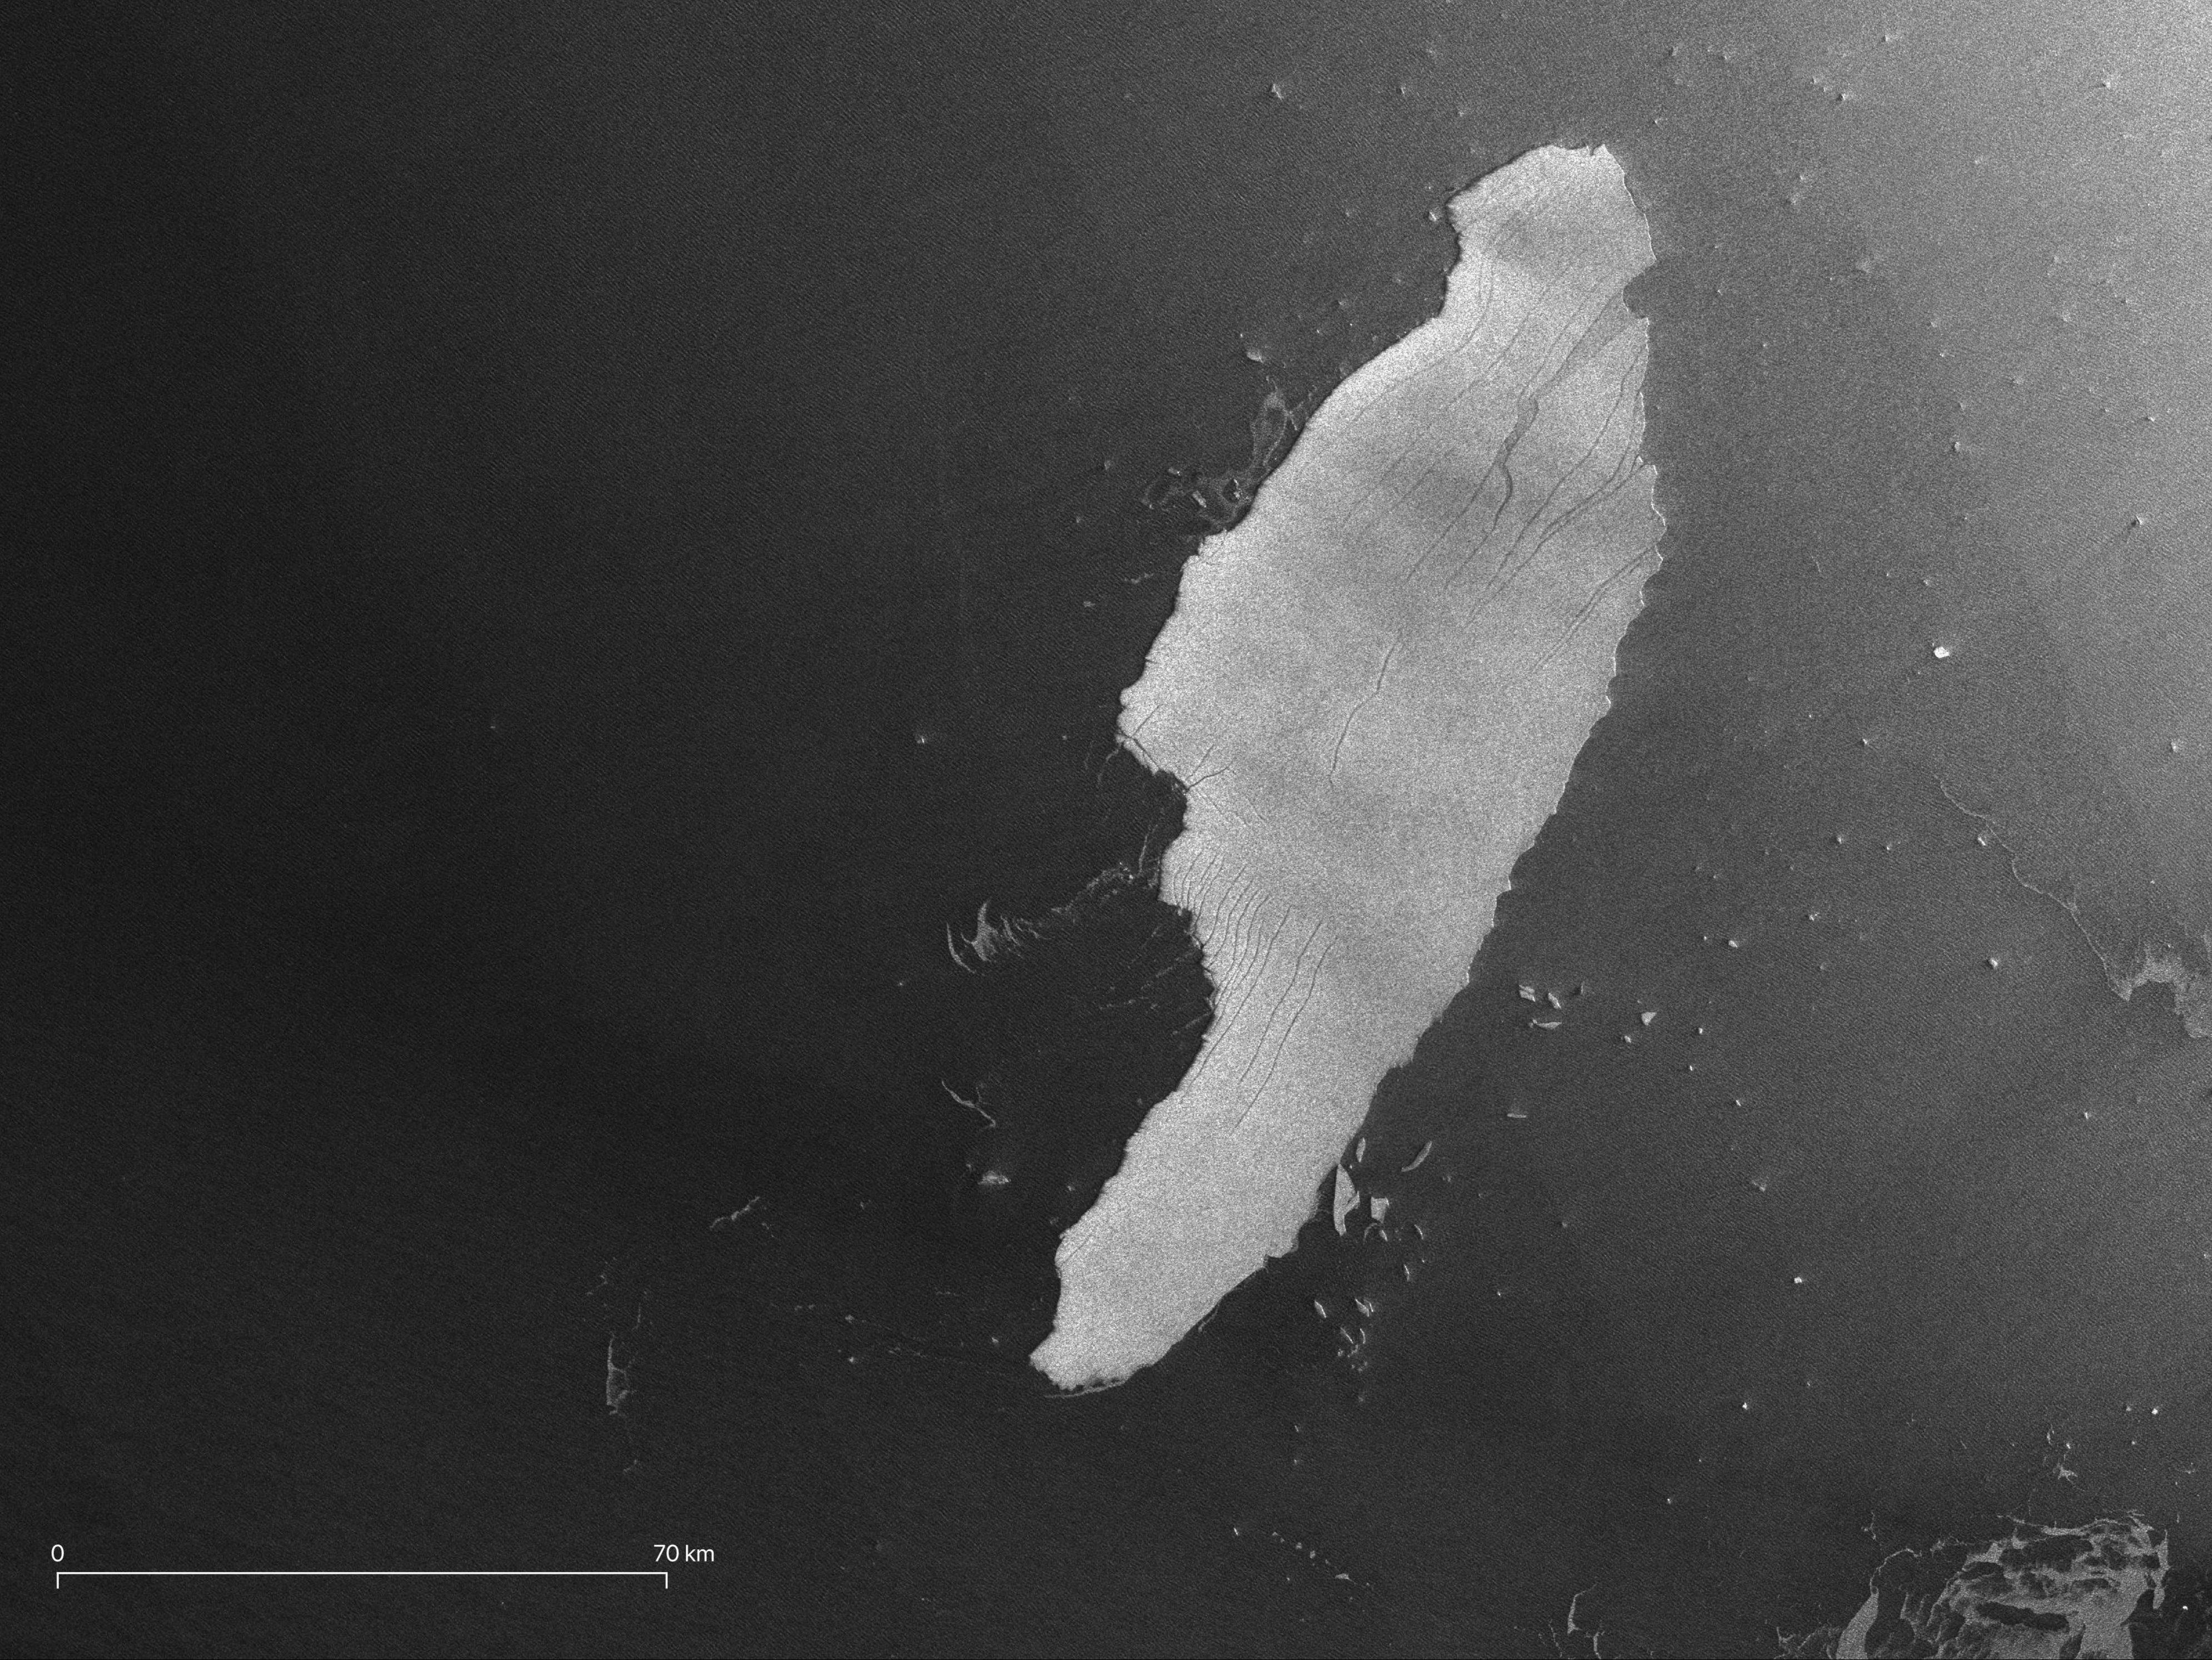 Satellite photograph of iceberg A68 taken by the Copernicus Sentinel-1 satellite, showing trail of smaller pieces of ice